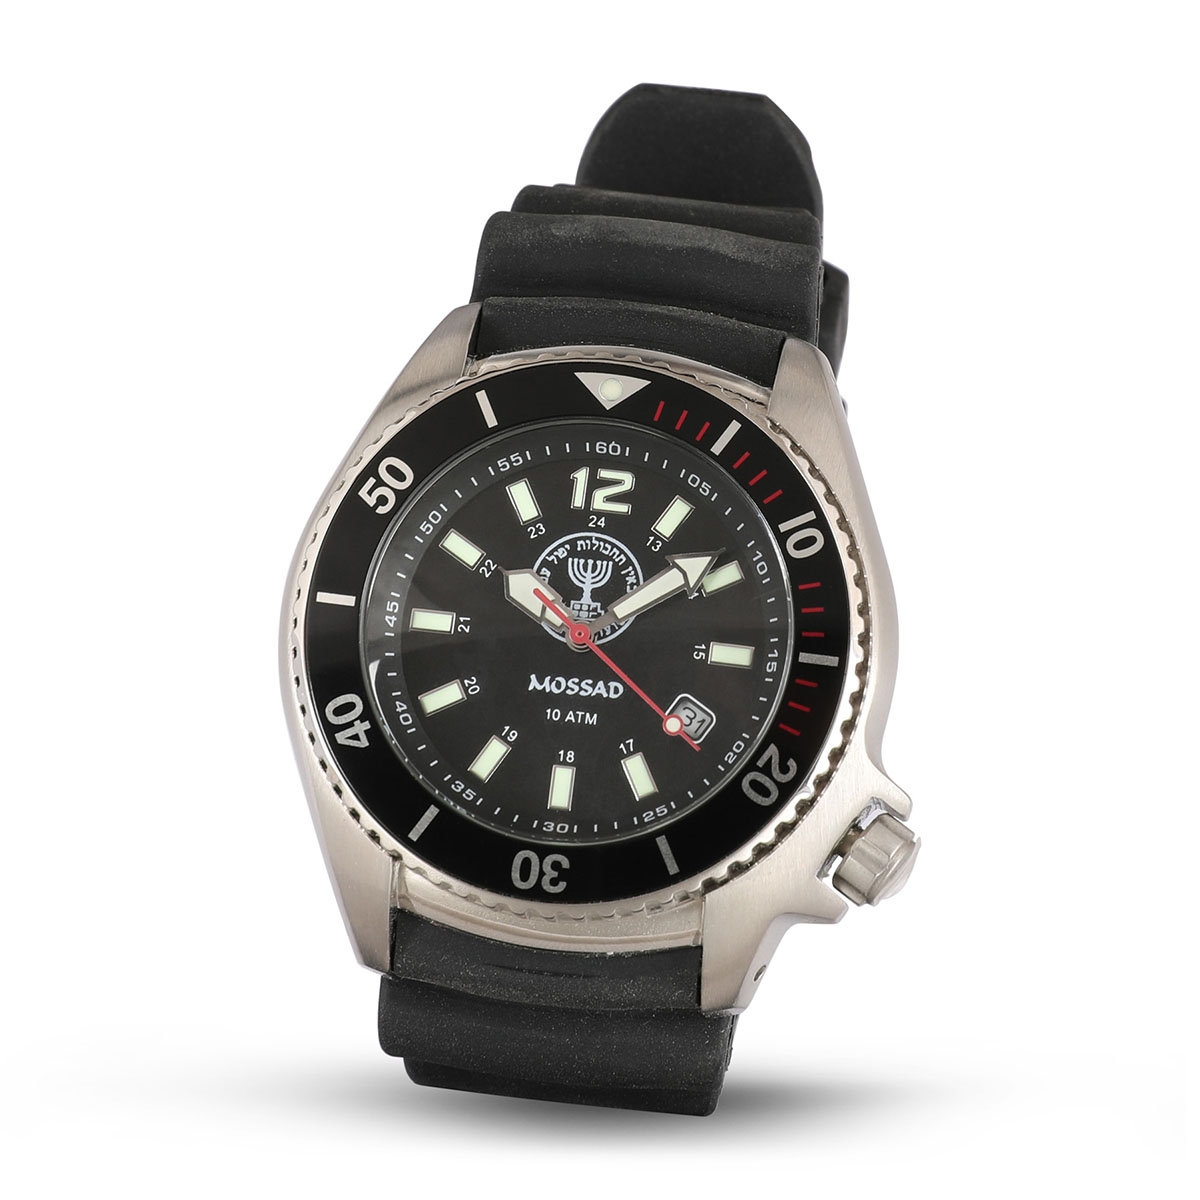 Deluxe Israel Mossad Diving Watch by Adi - 2